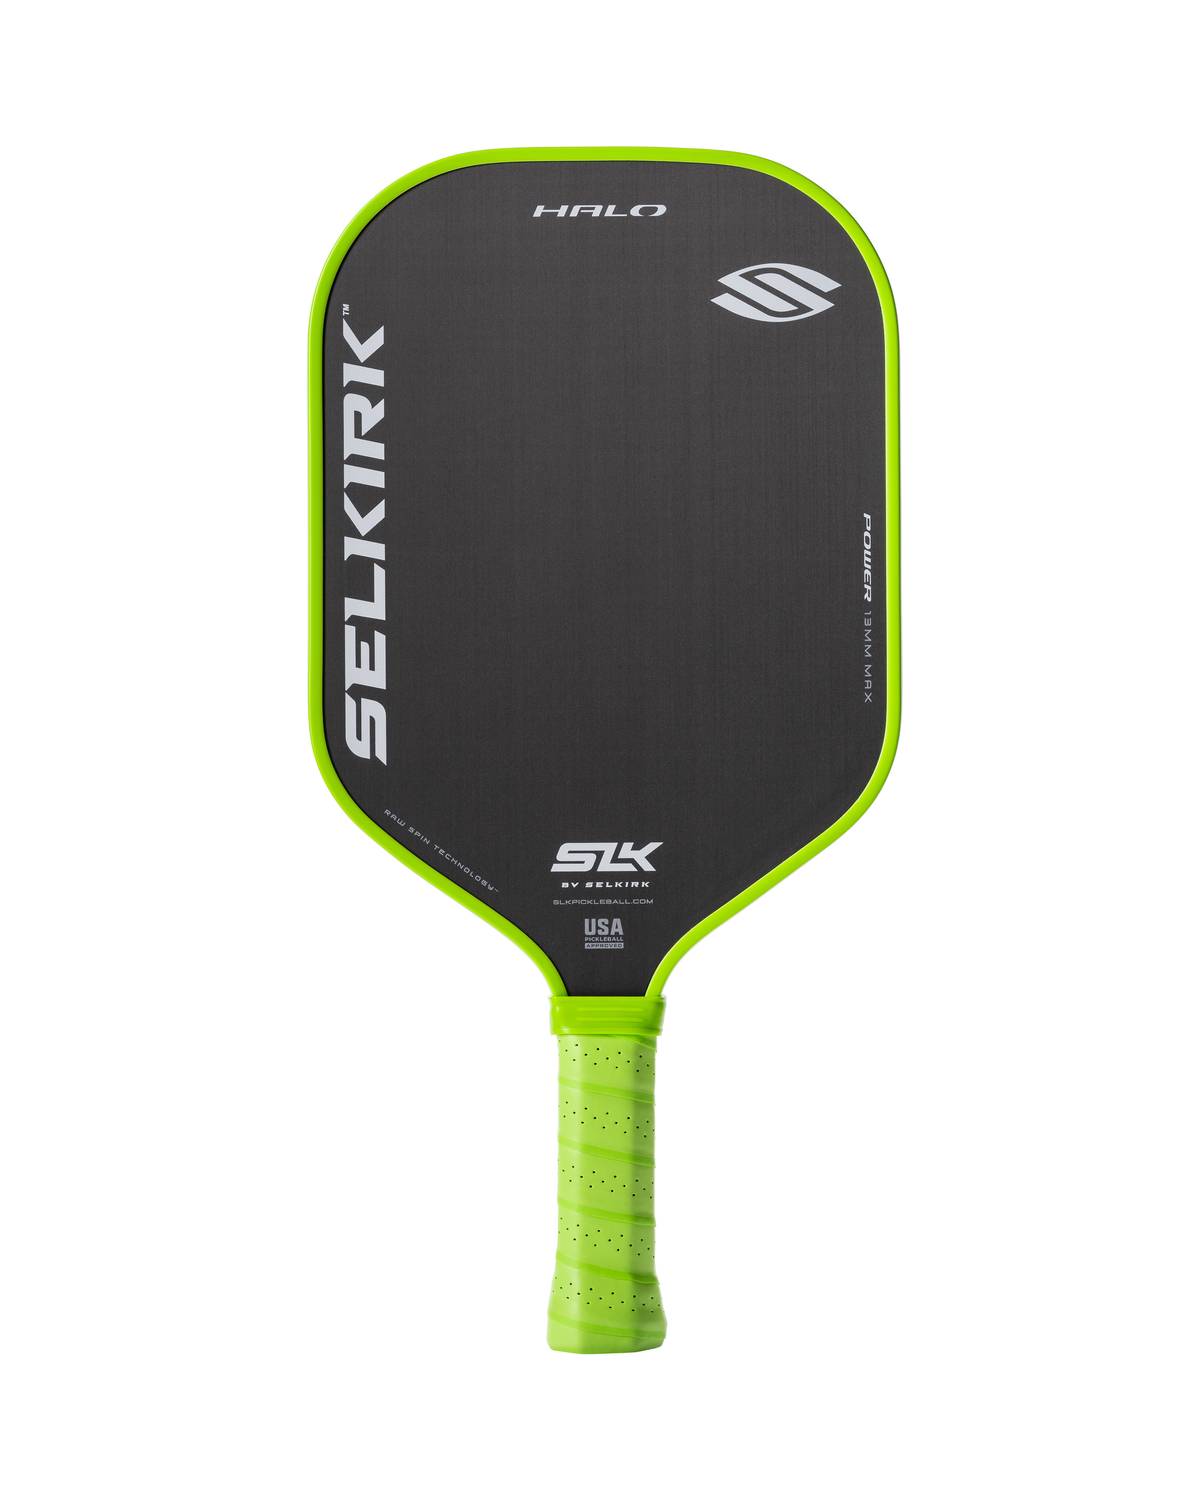 Choose a Selkirk SLK Halo Max pickleball paddle on a white background.